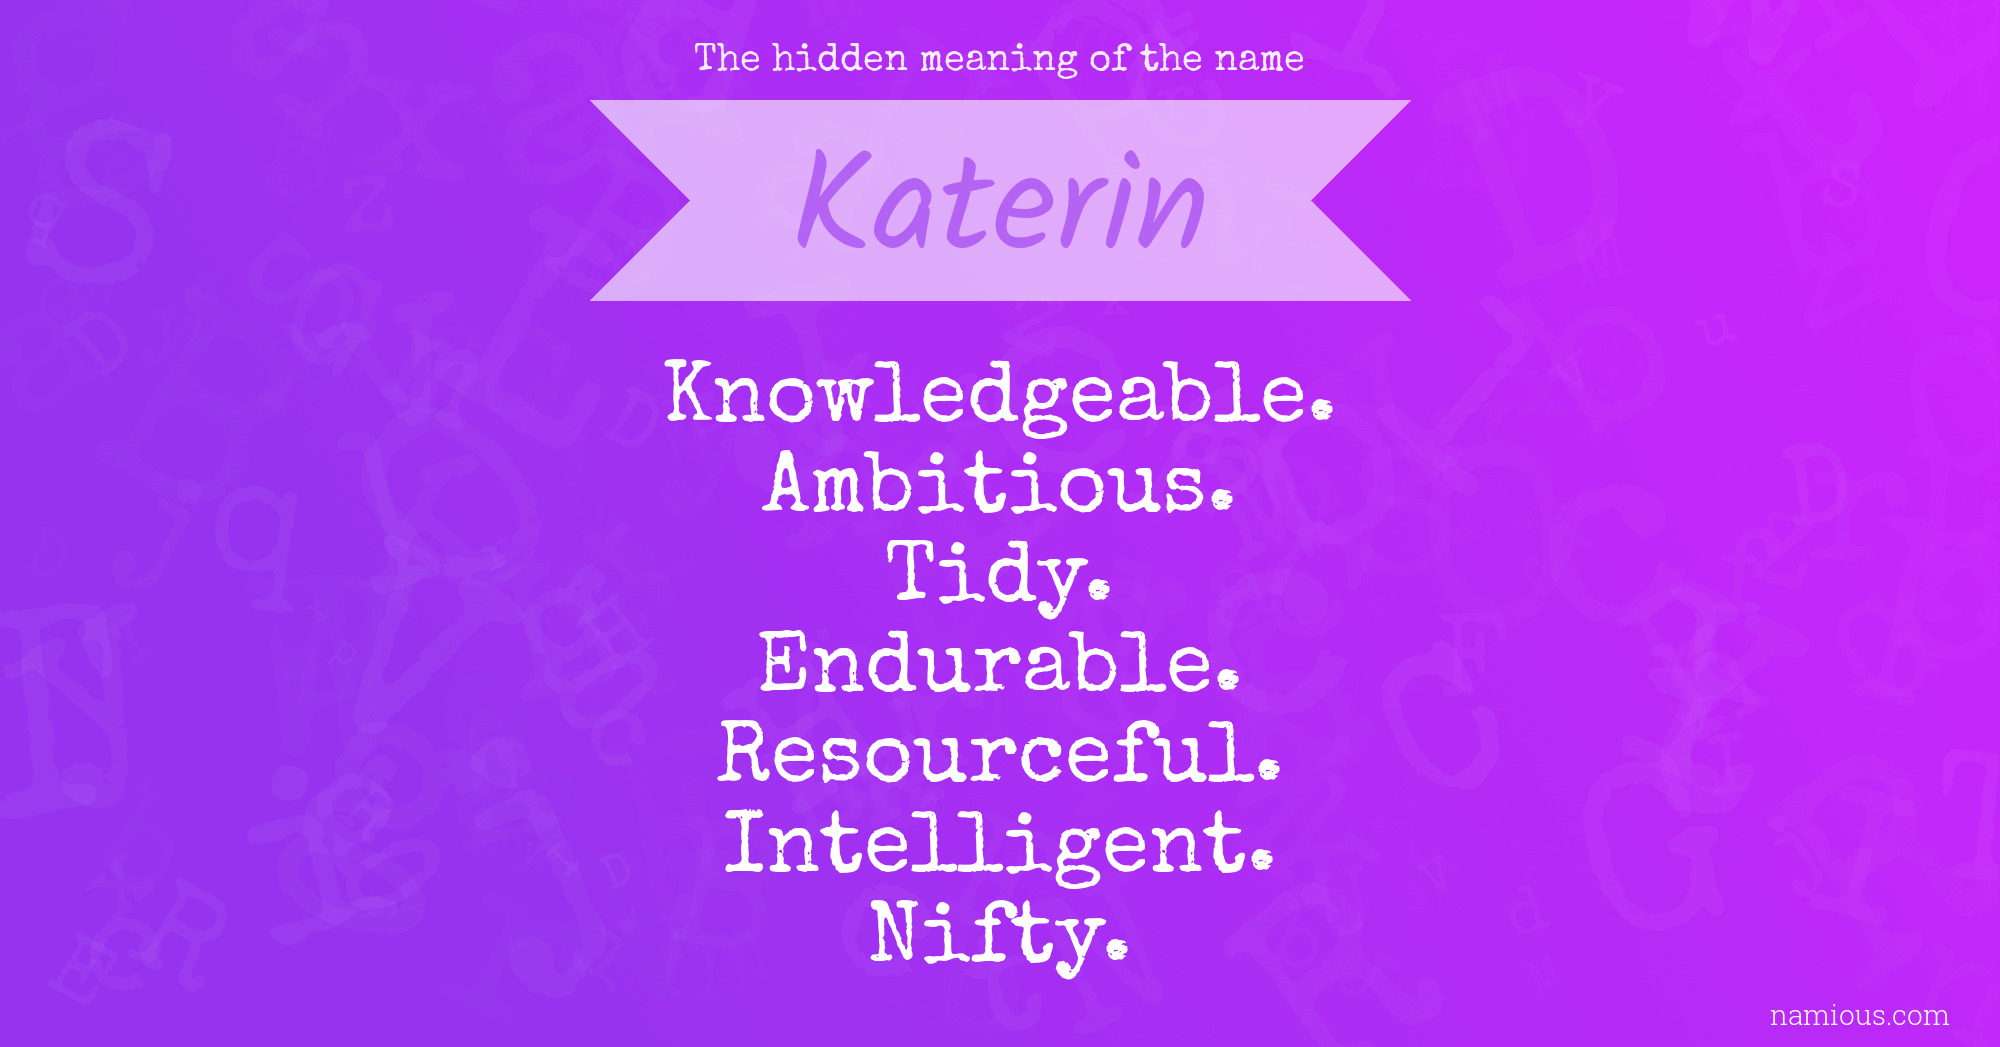 The hidden meaning of the name Katerin